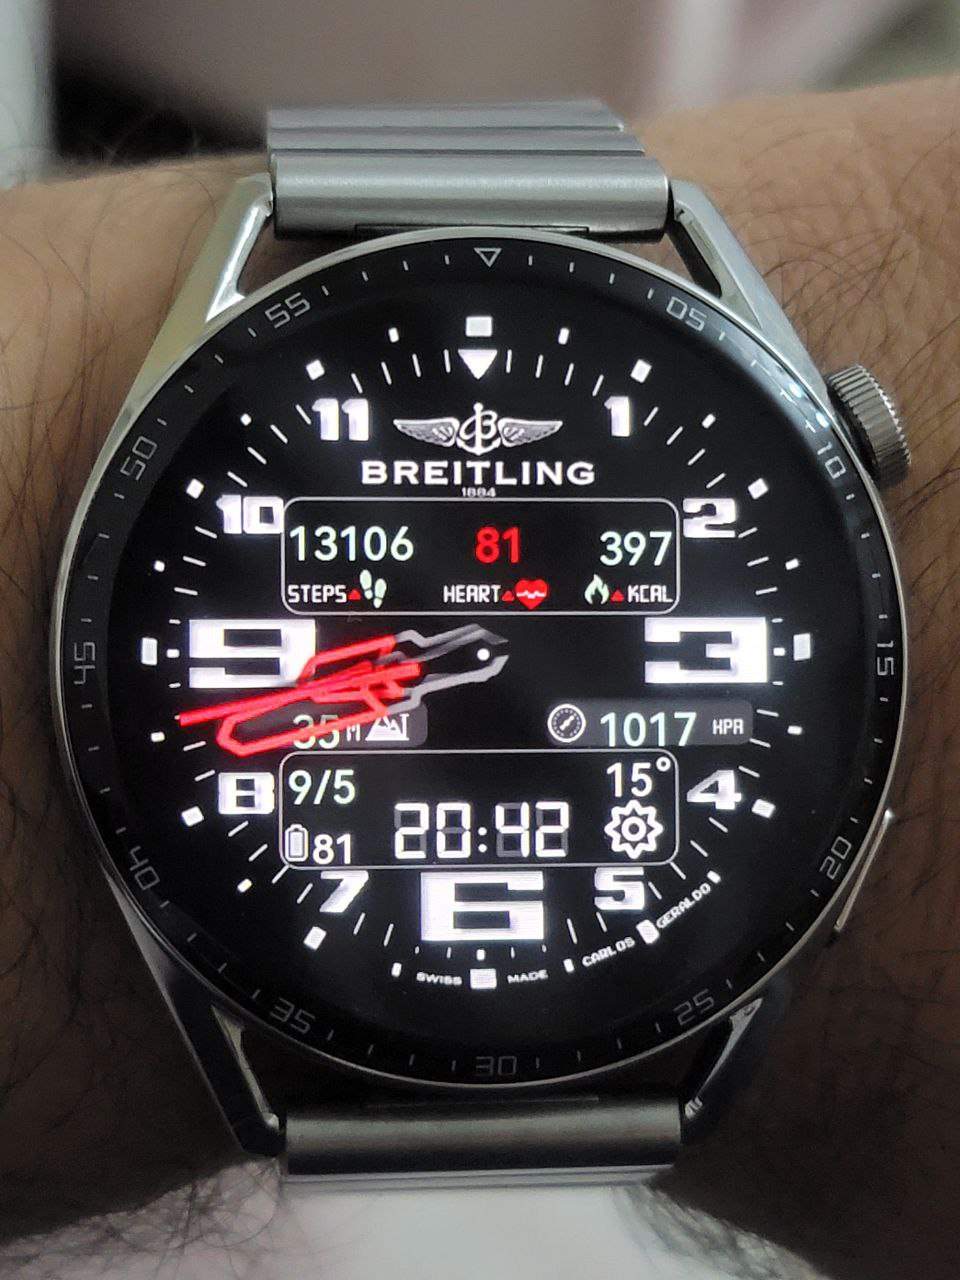 Breitling 1884 realistic black HQ watch face theme